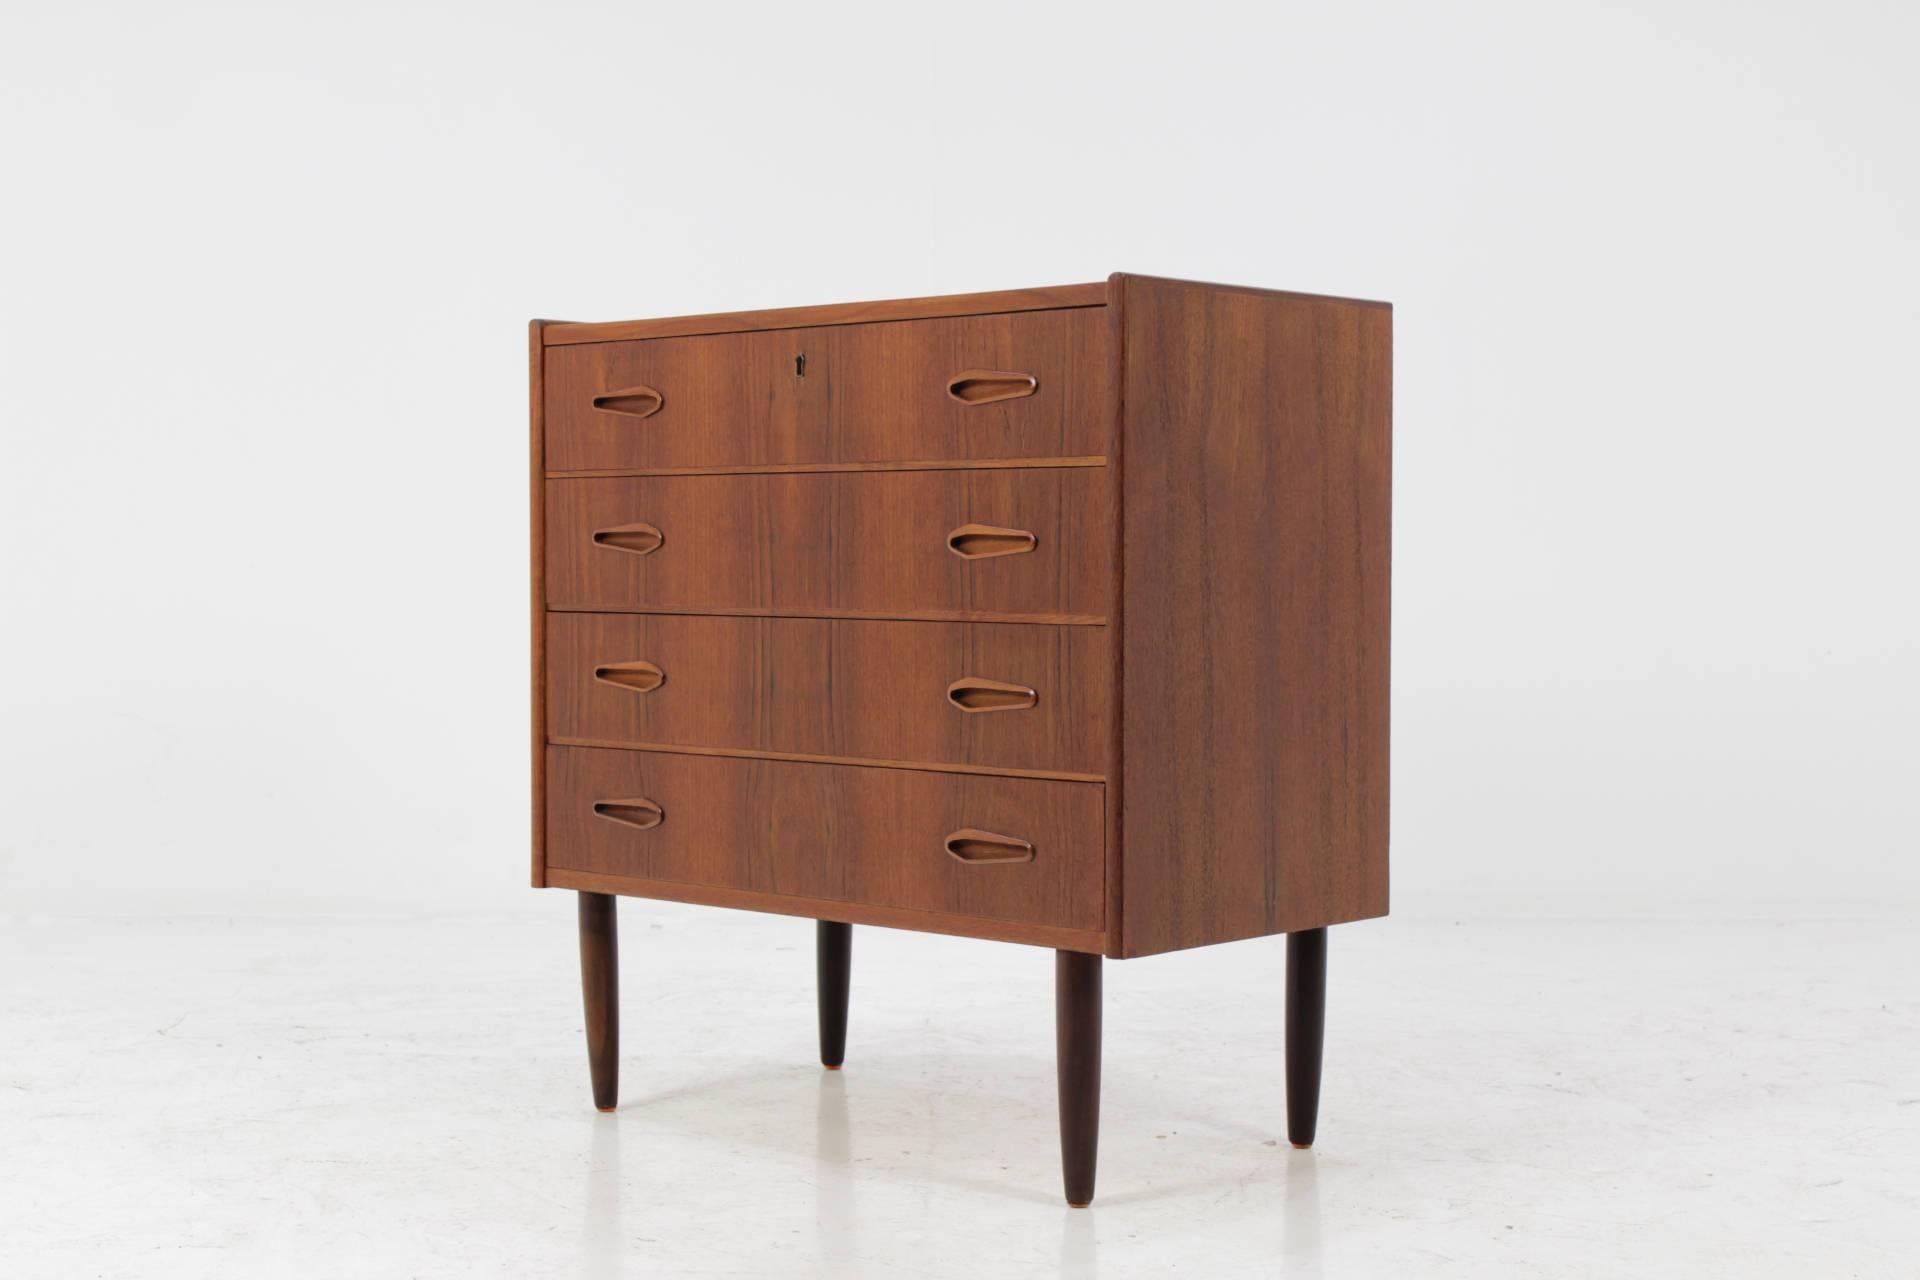 This commode features four drawers. The item was carefully restored.